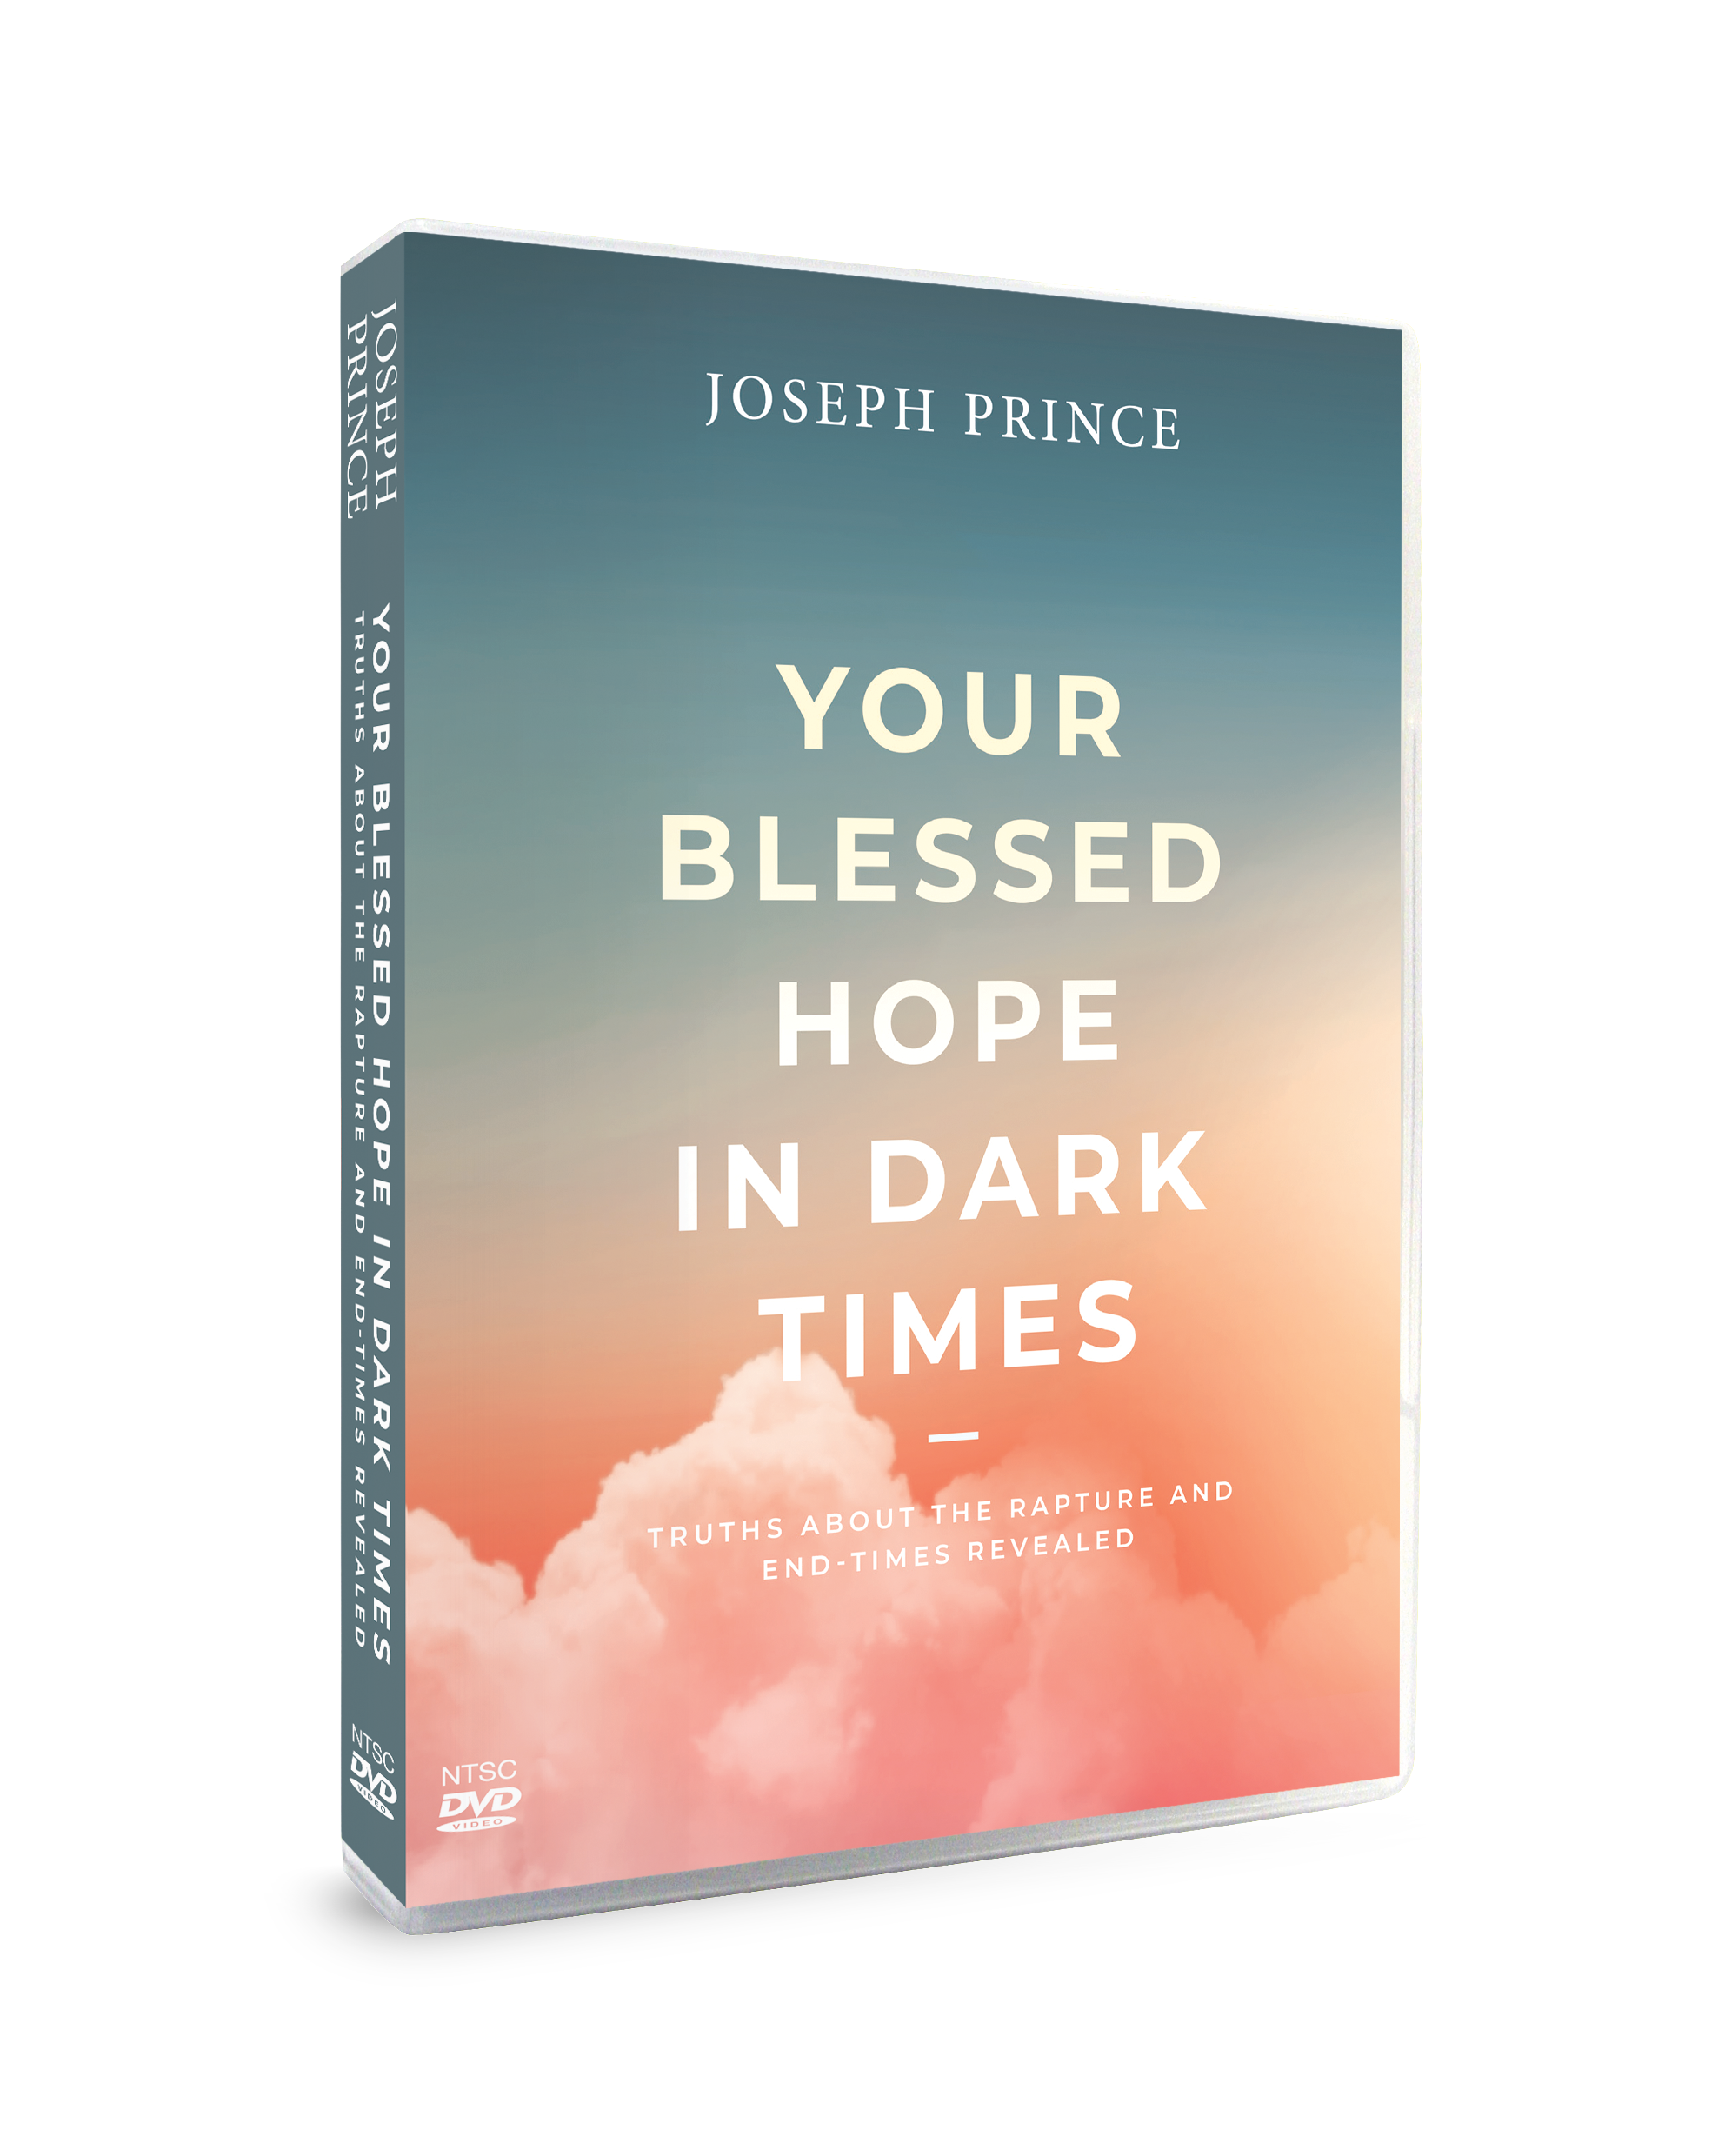 ROCKONLINE | New Creation Church | NCC | DVD Album | Joseph Prince | Your Blessed Hope In Dark Times | Rock Bookshop | Rock Bookstore | Star Vista | Free delivery for Singapore orders above $50.